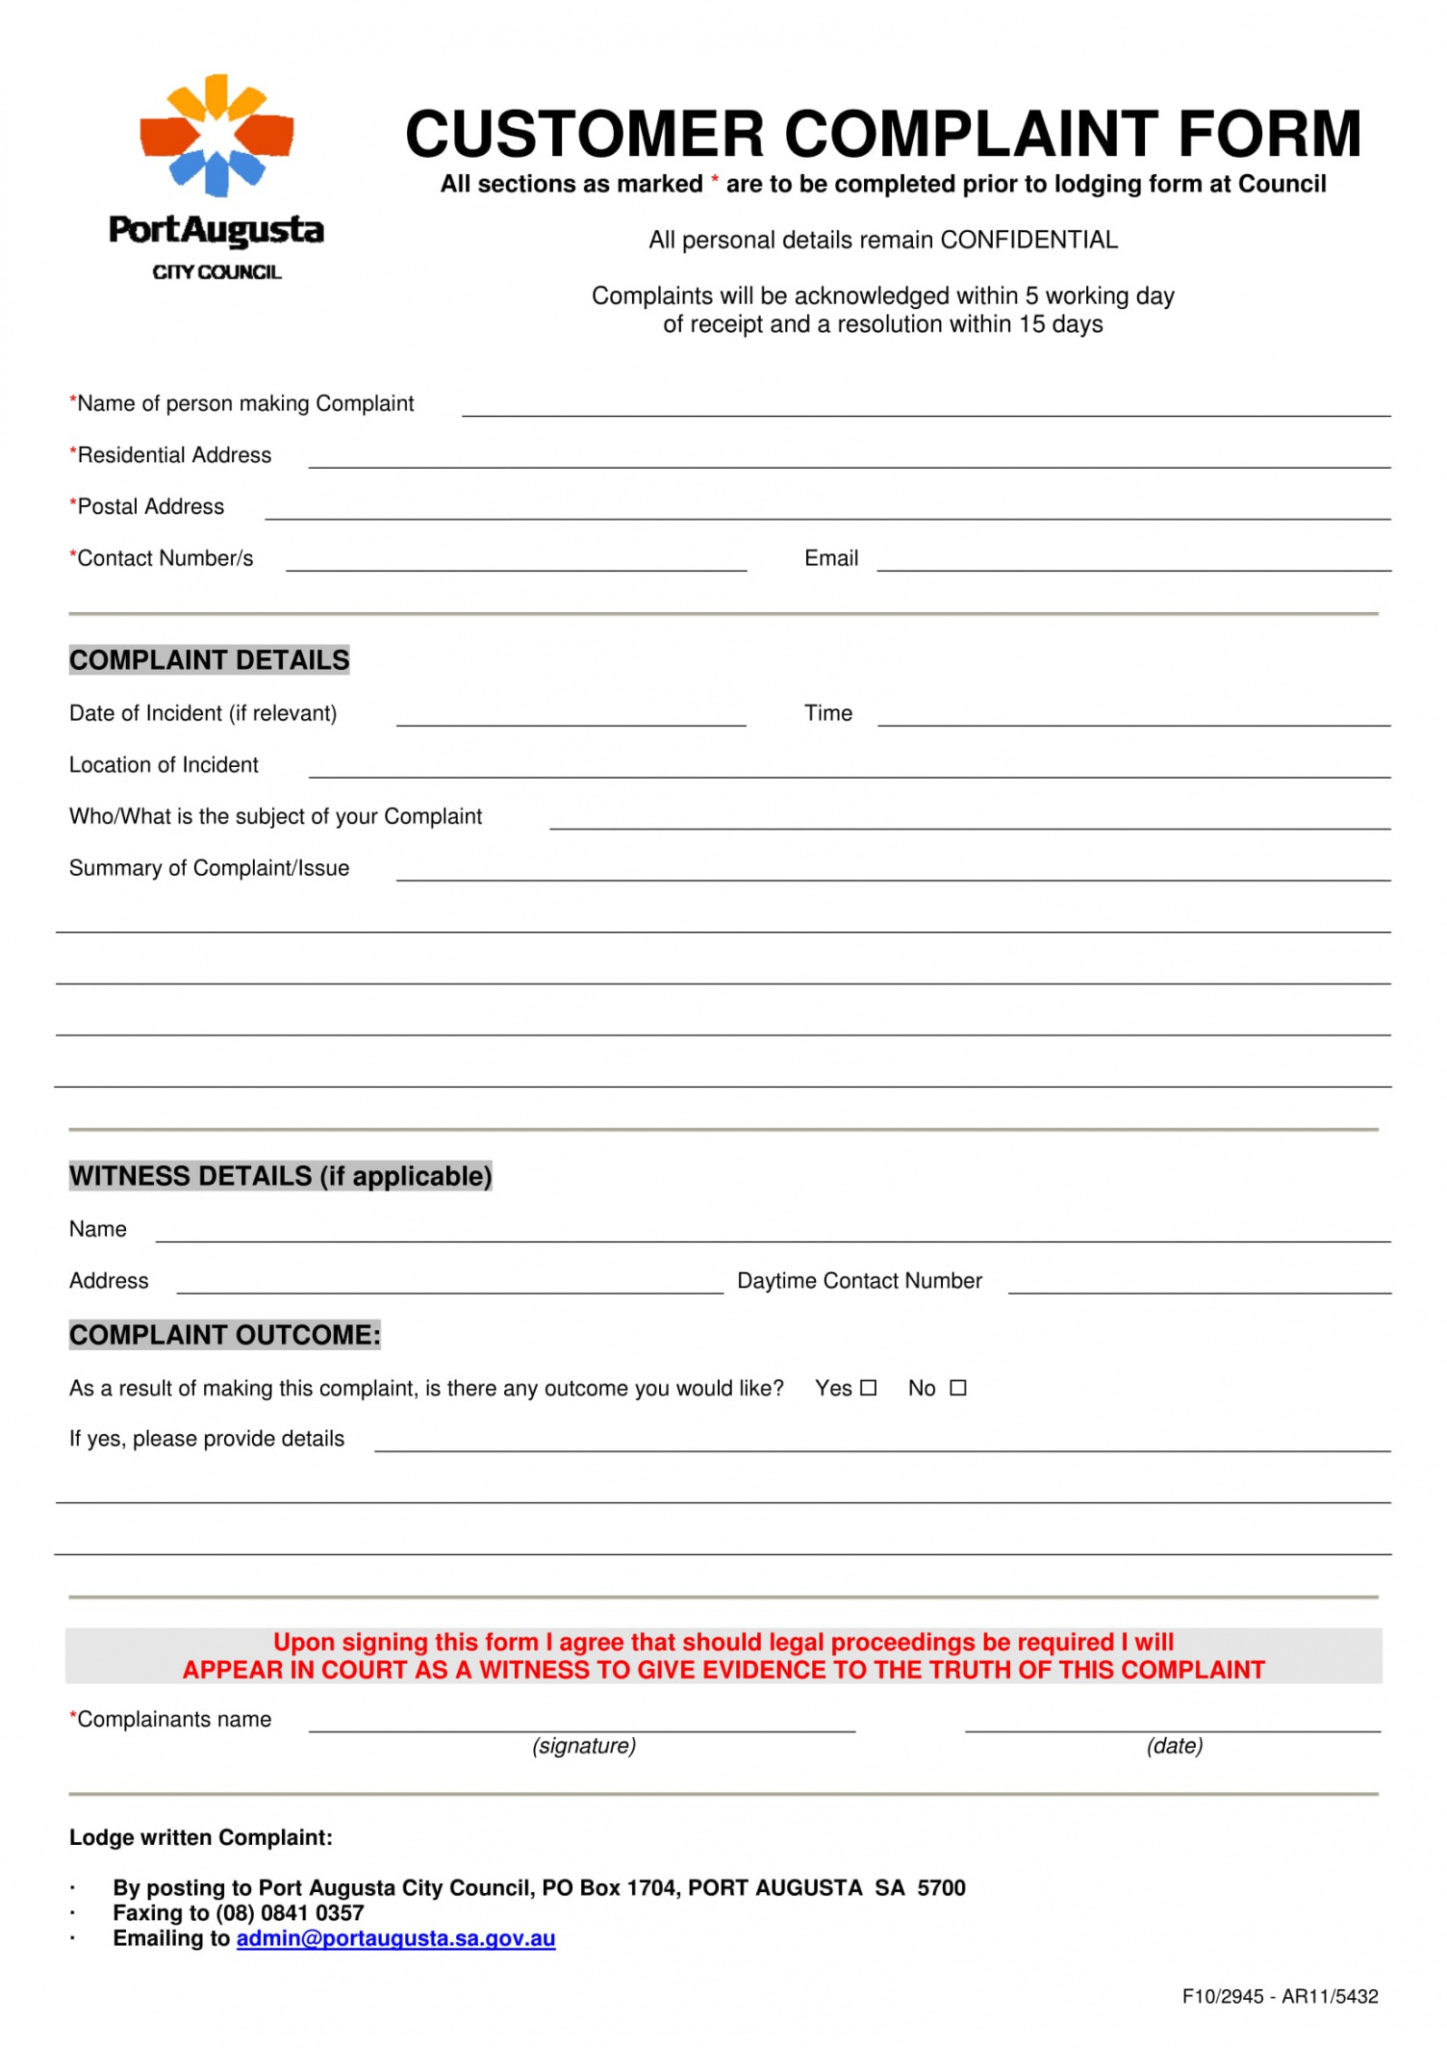 free-12-customer-complaint-forms-in-pdf-ms-word-customer-complaint-form